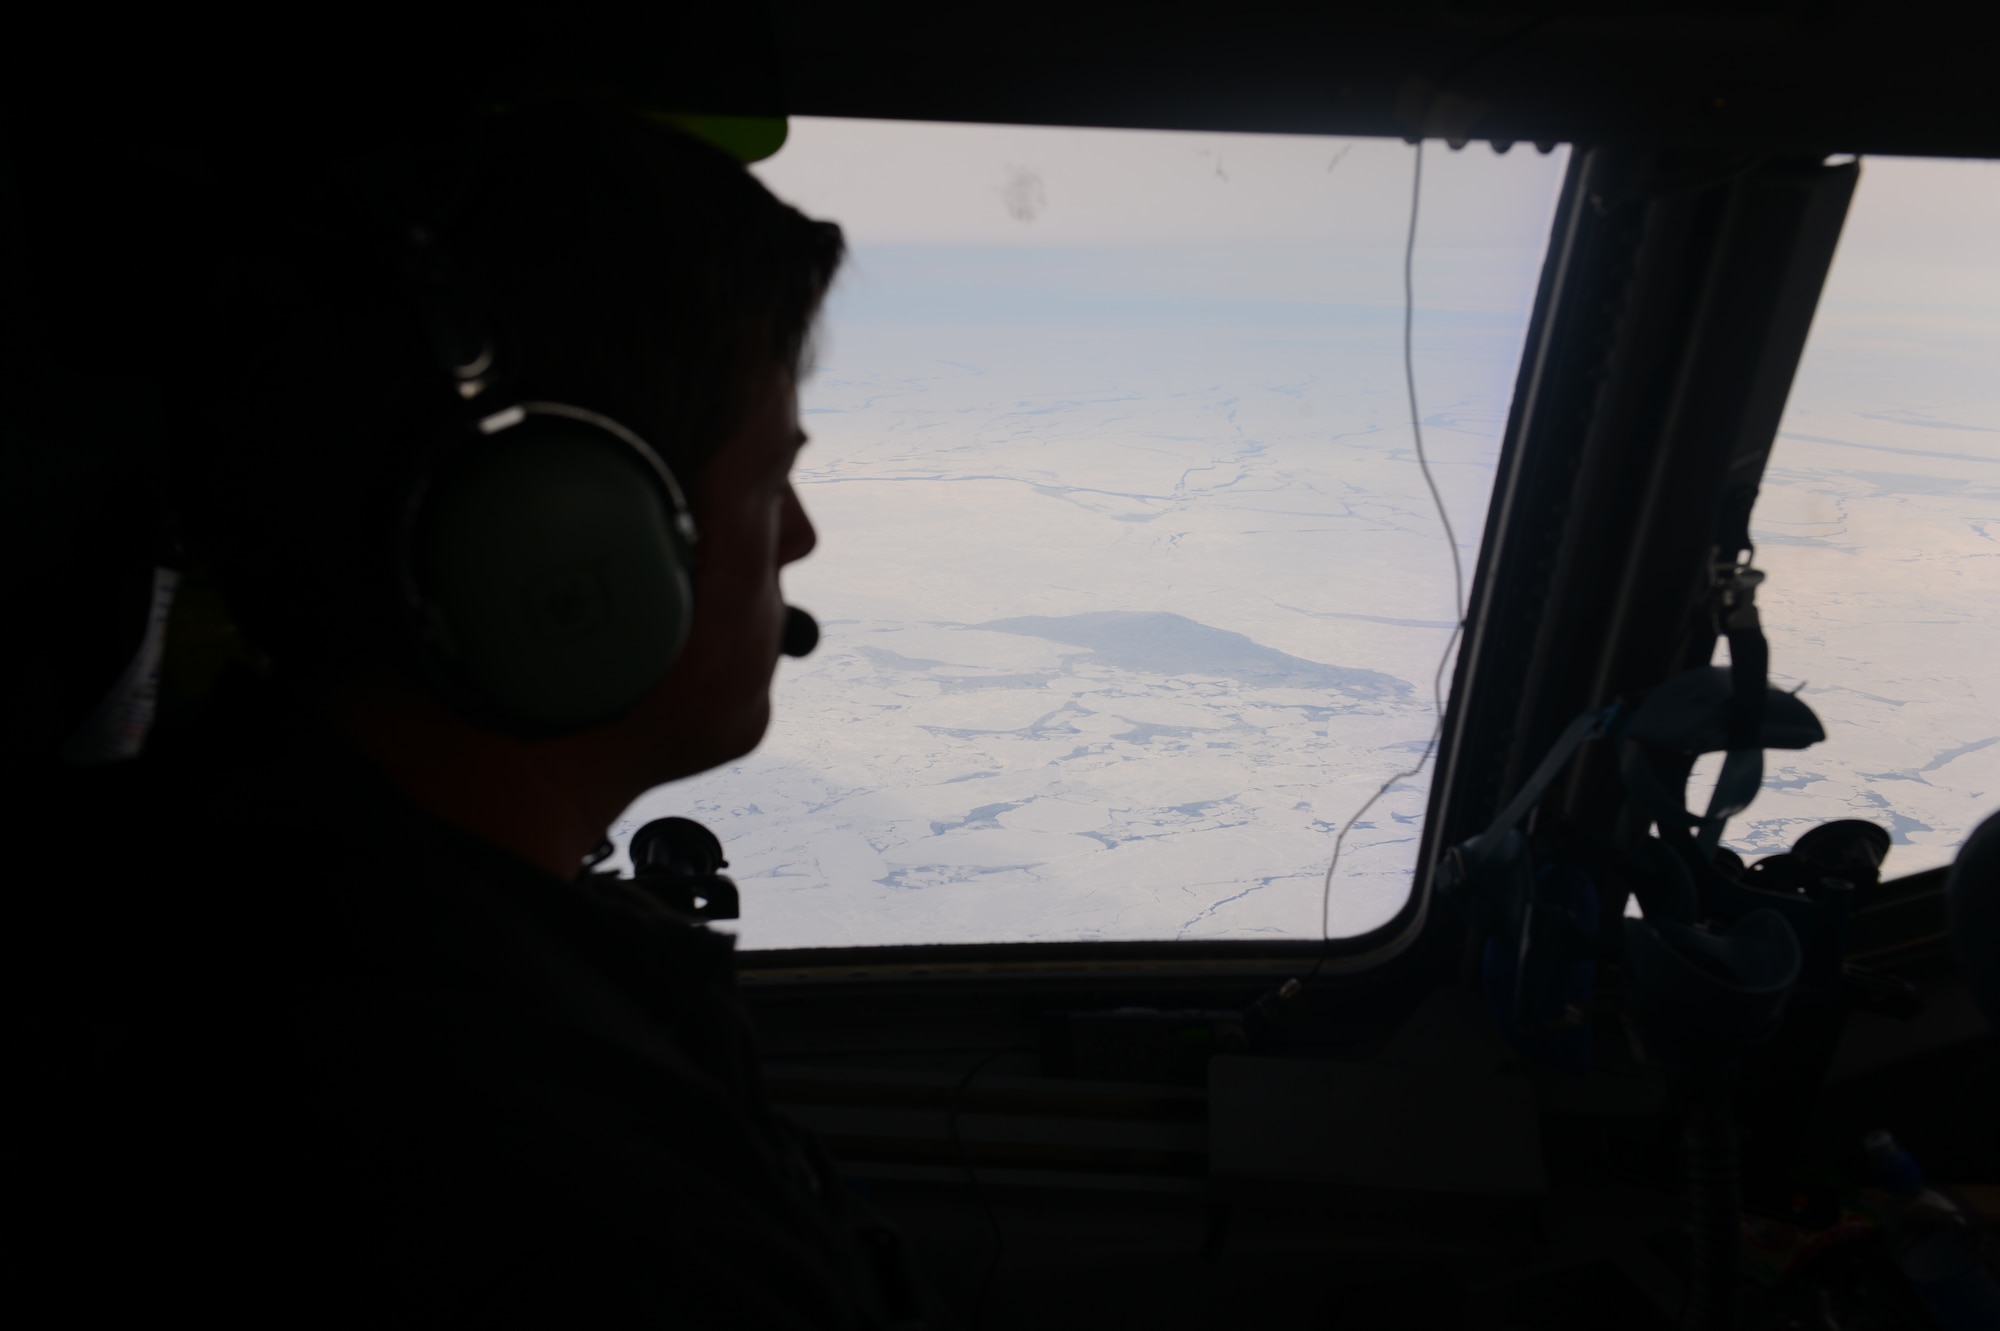 Maj. Jared Wood, 304th Expeditionary Airlift Squadron and 313th Airlift Squadron pilot looks out the window of the McChord Field C-17 Globemaster III aircraft prior to landing, Oct. 8th, 2014 at the Pegasus White Ice runway, part of McMurdo Station, Antarctica. The crew of pilots and loadmasters was made up of members from the 62nd and 446th Airlift Wings. (U.S. Air Force photo/Master Sgt. Todd Wivell)